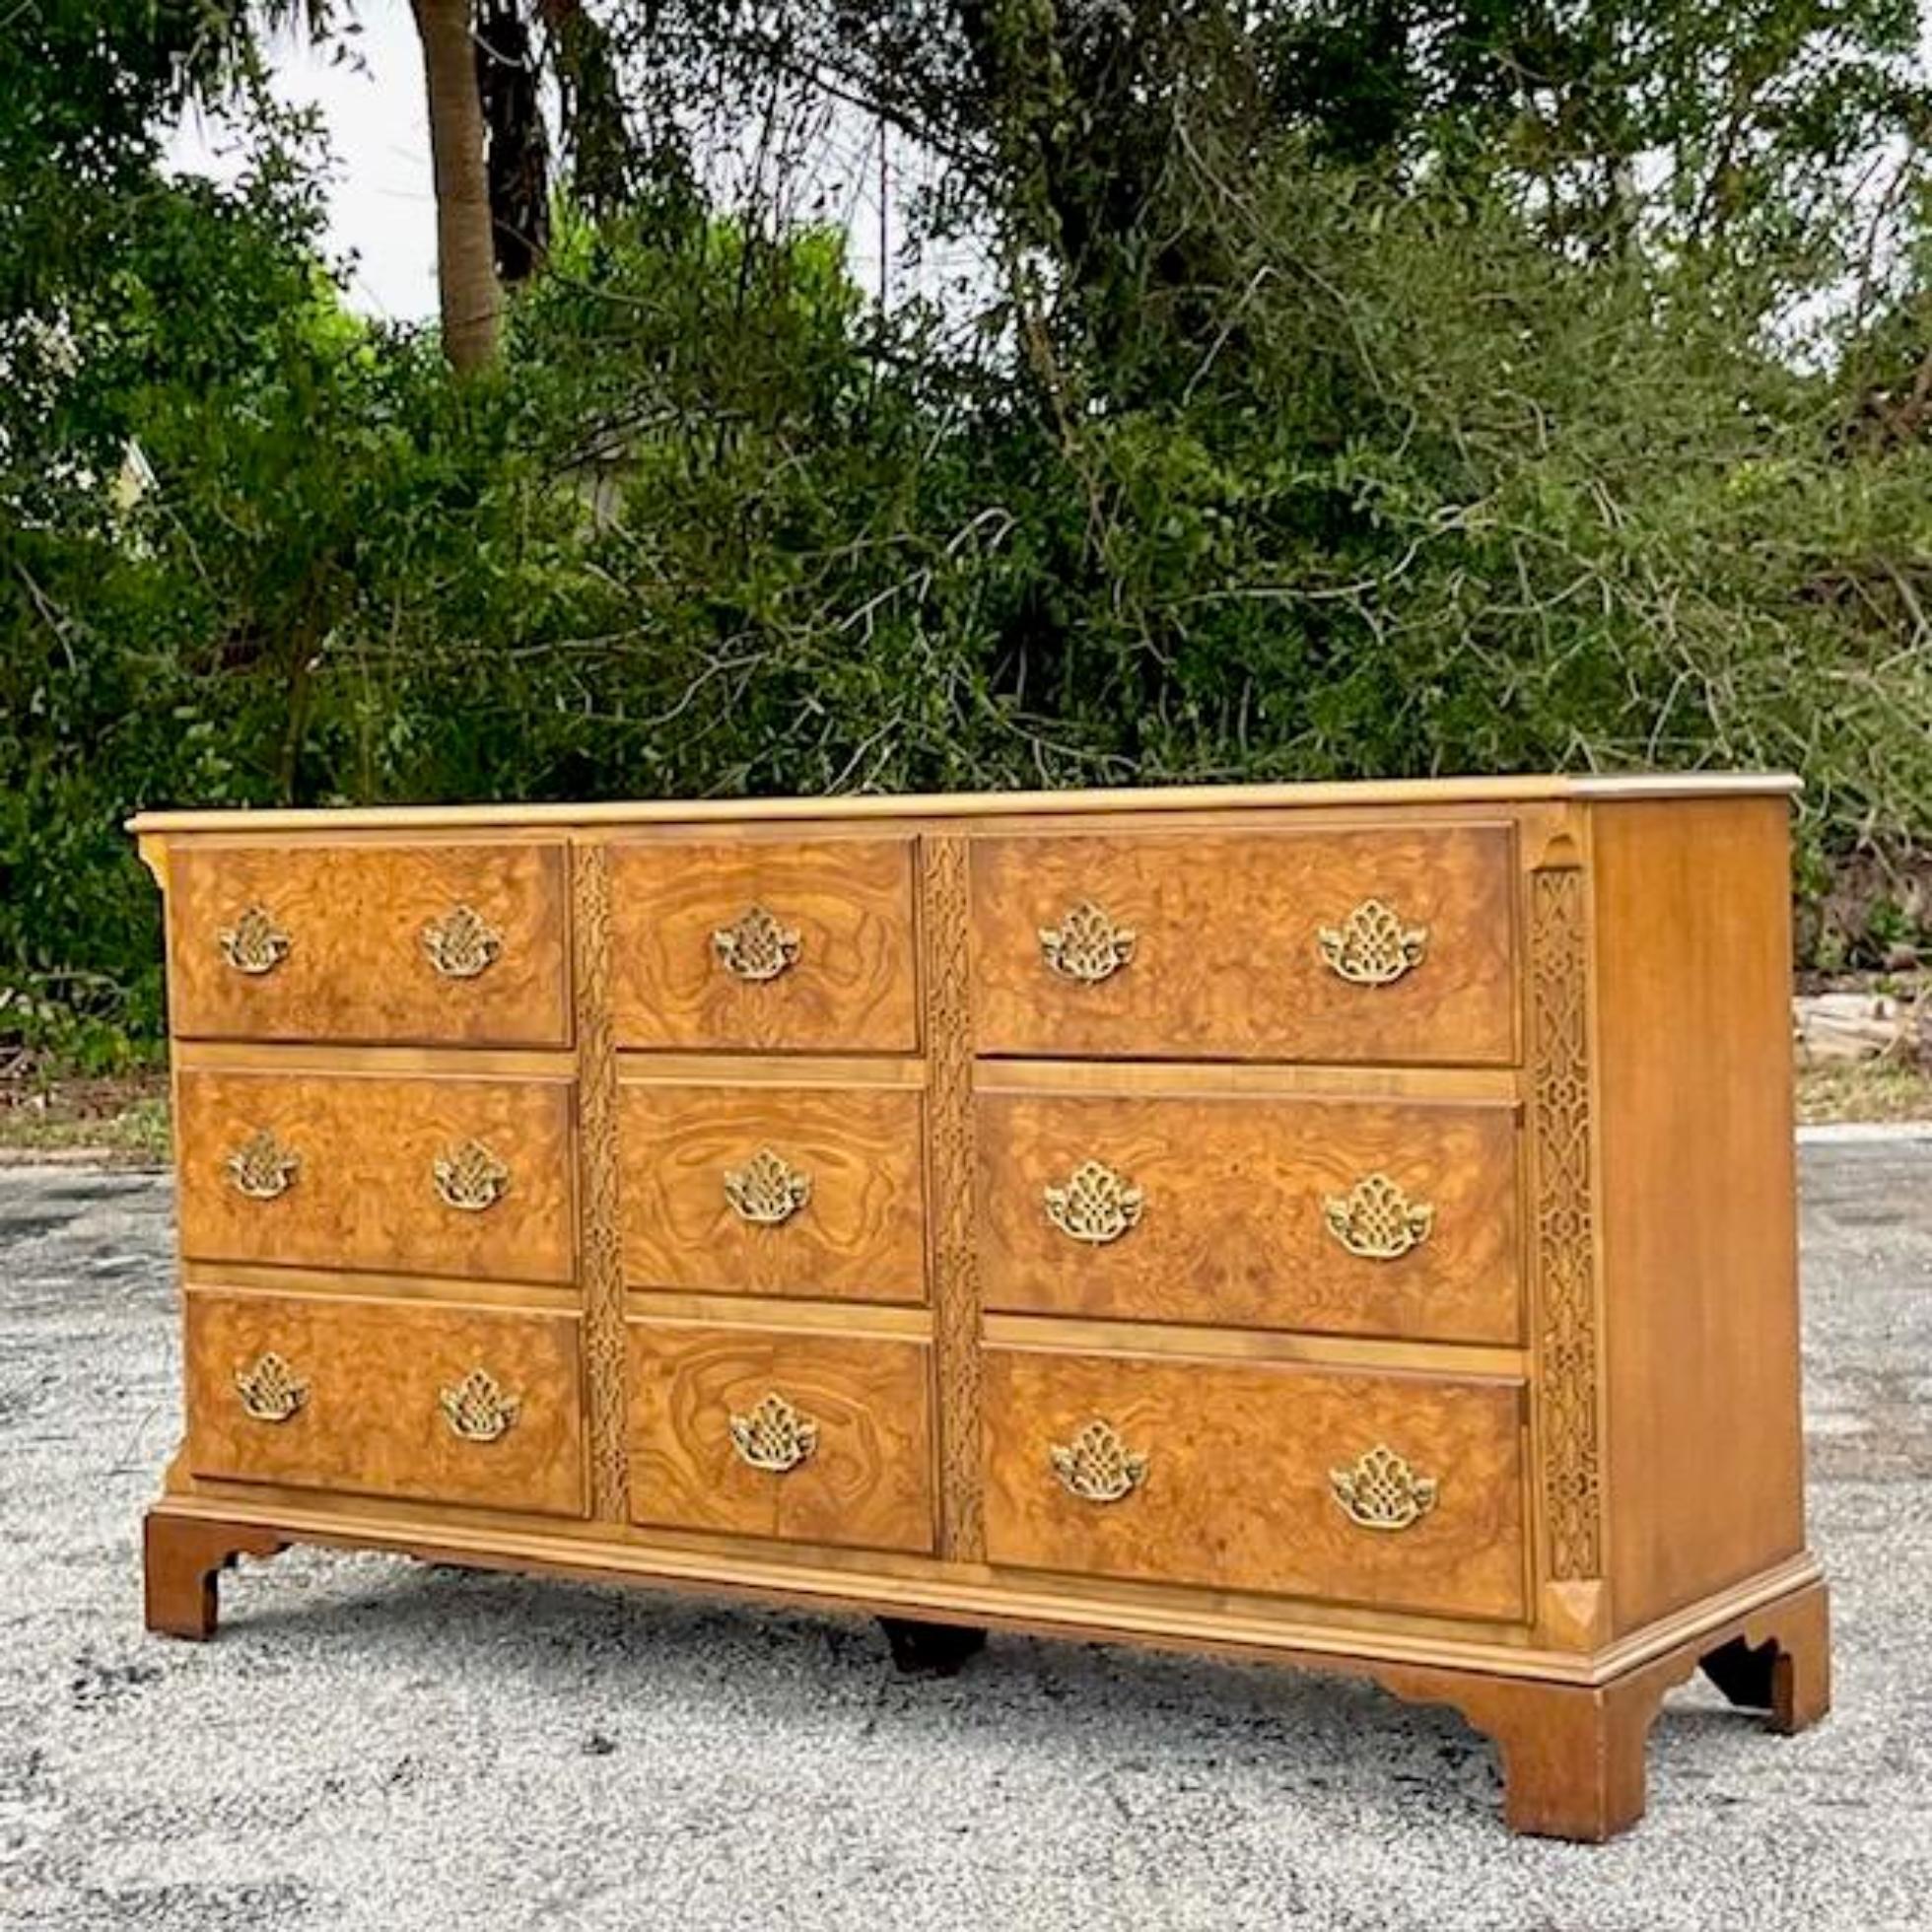 A stunning vintage Boho standard 9 drawer dresser. Made by the iconic Baker group and tagged inside the drawer. A fantastic Burl wood cabinet with a carved fretwork trim. A beautiful warm patina from time. Coordinating pieces also available on my